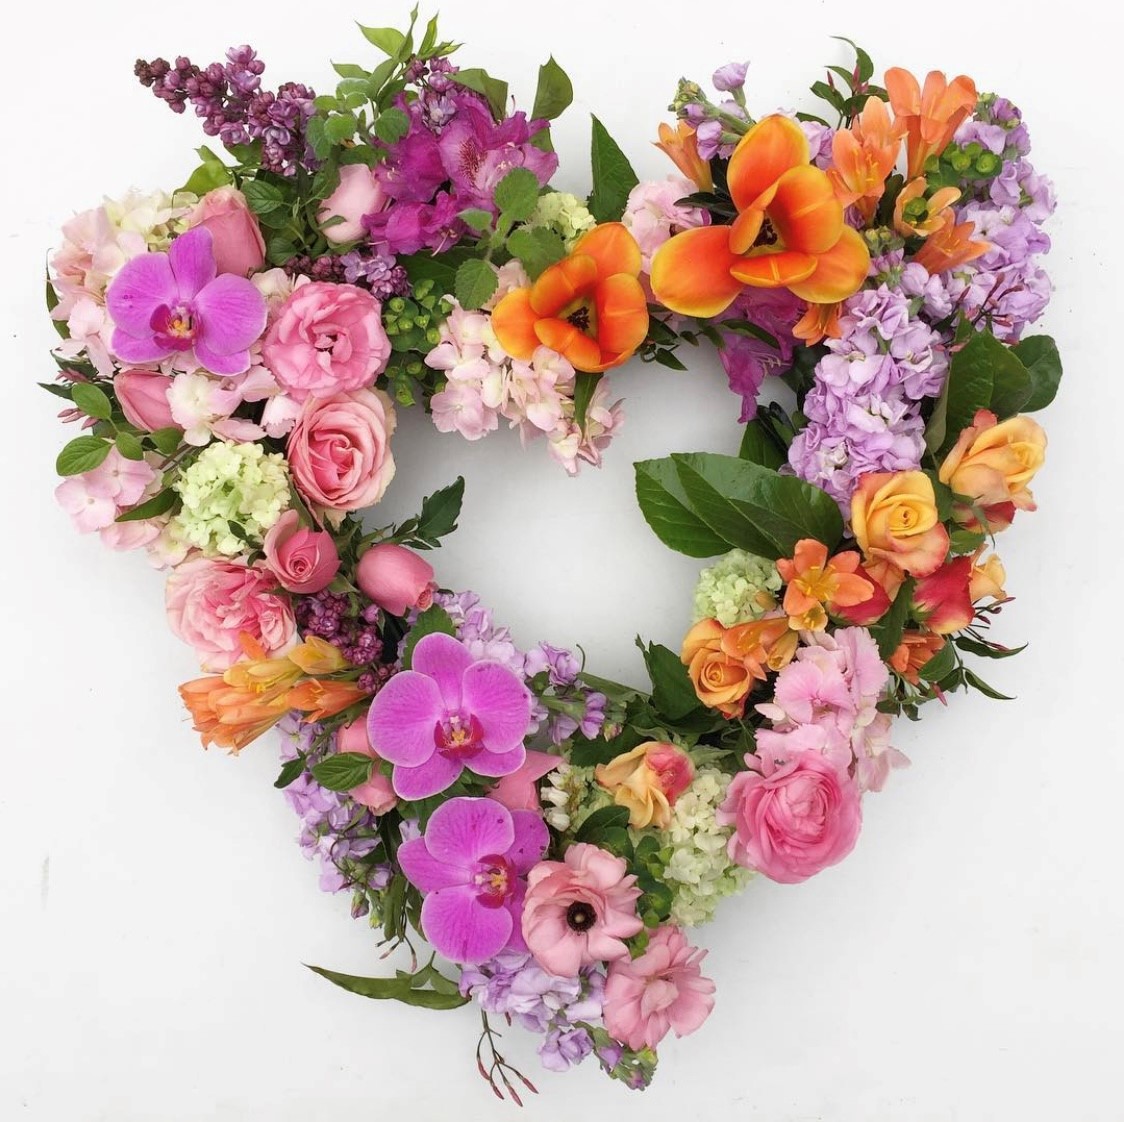 Colourful wreath in lilacs, pinks and oranges, available in round or heart shaped wreath. Melbourne delivery only. 1- 2 days notice.